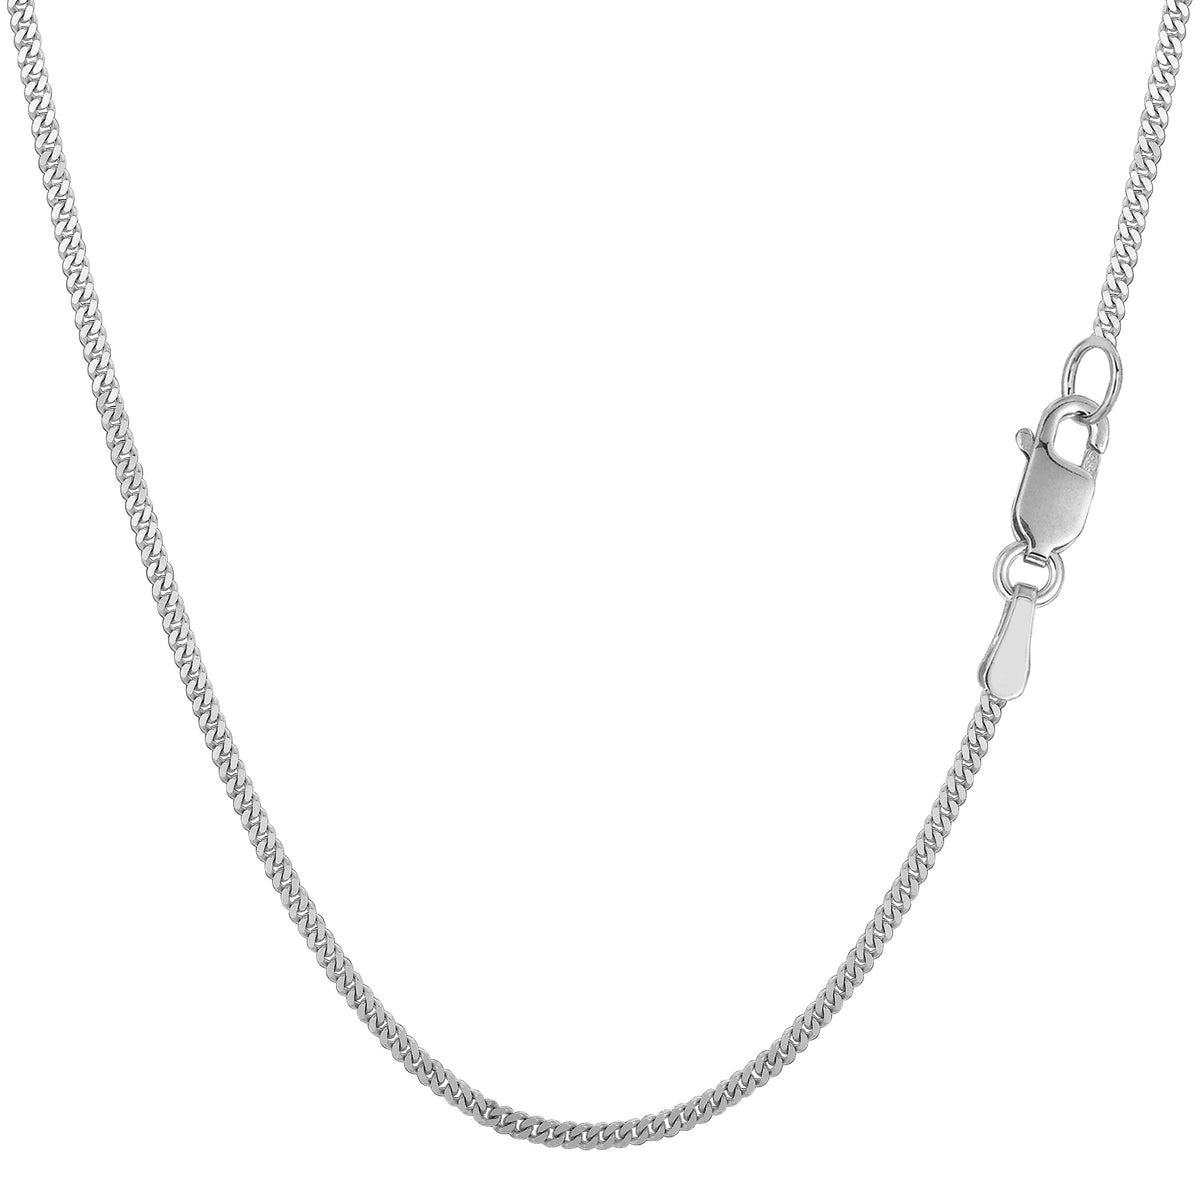 14k White Gold Gourmette Chain Necklace, 1.5mm